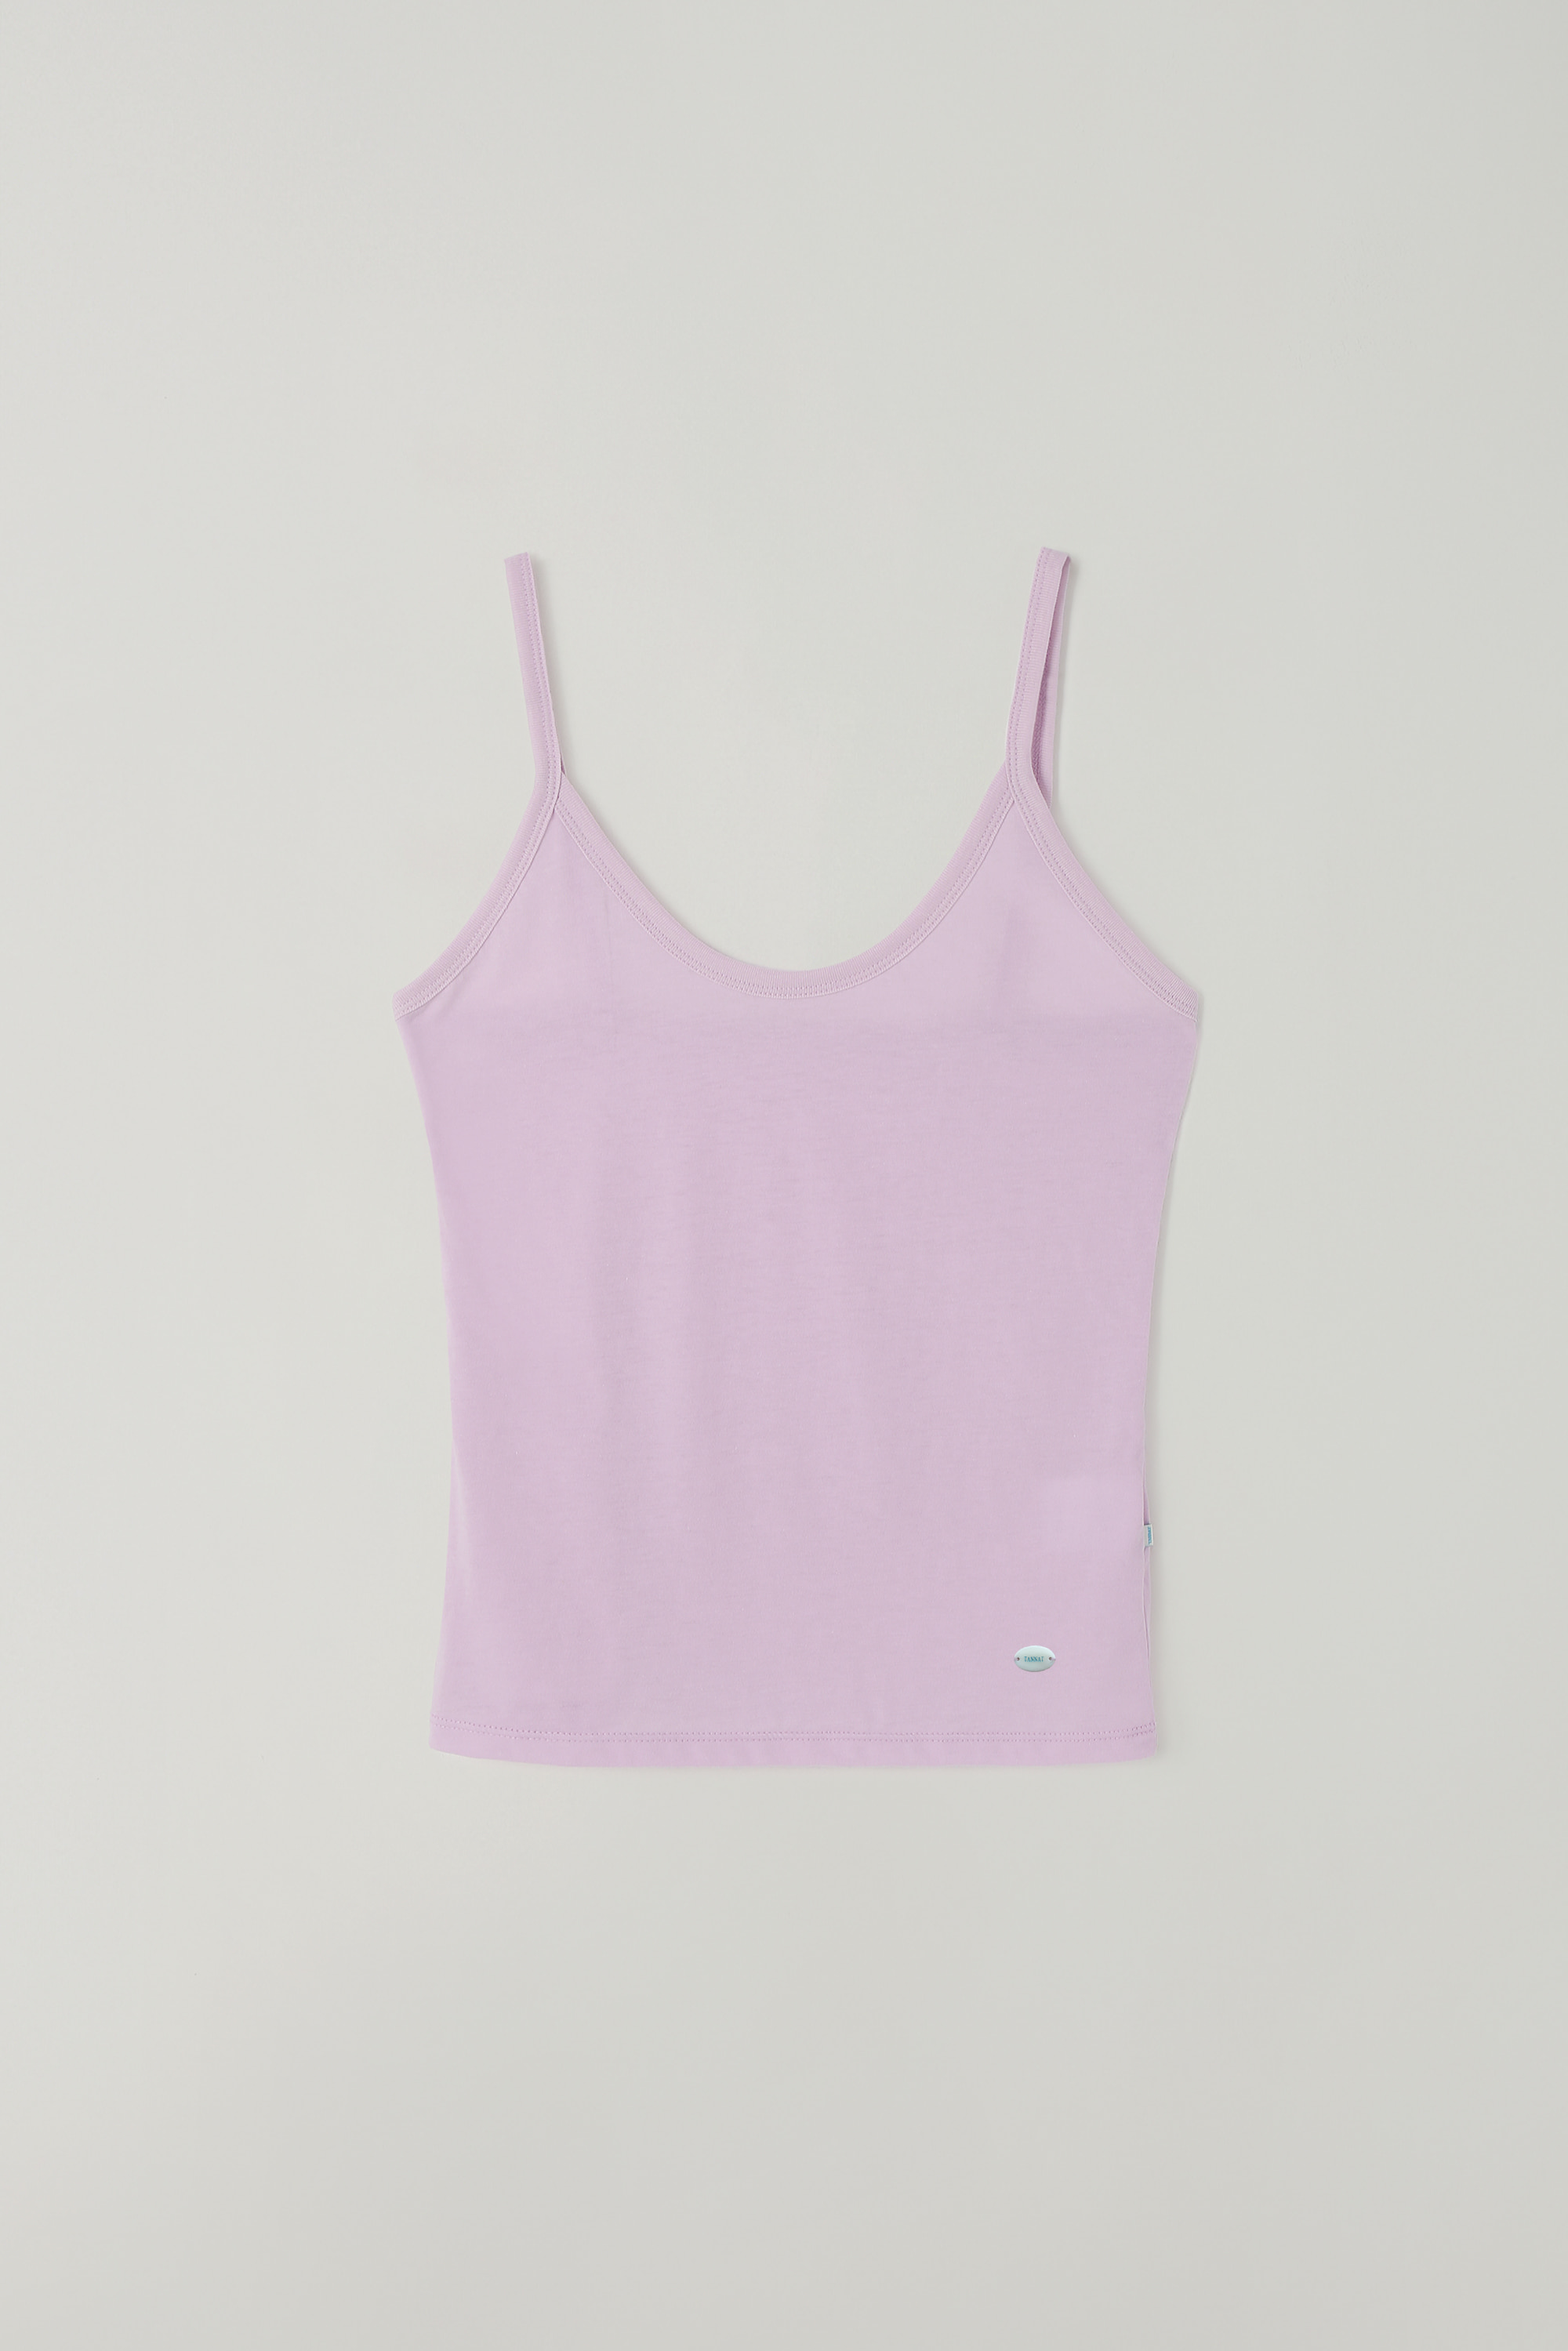 (1st re-stock) T/T Essential sleeveless top (purple)